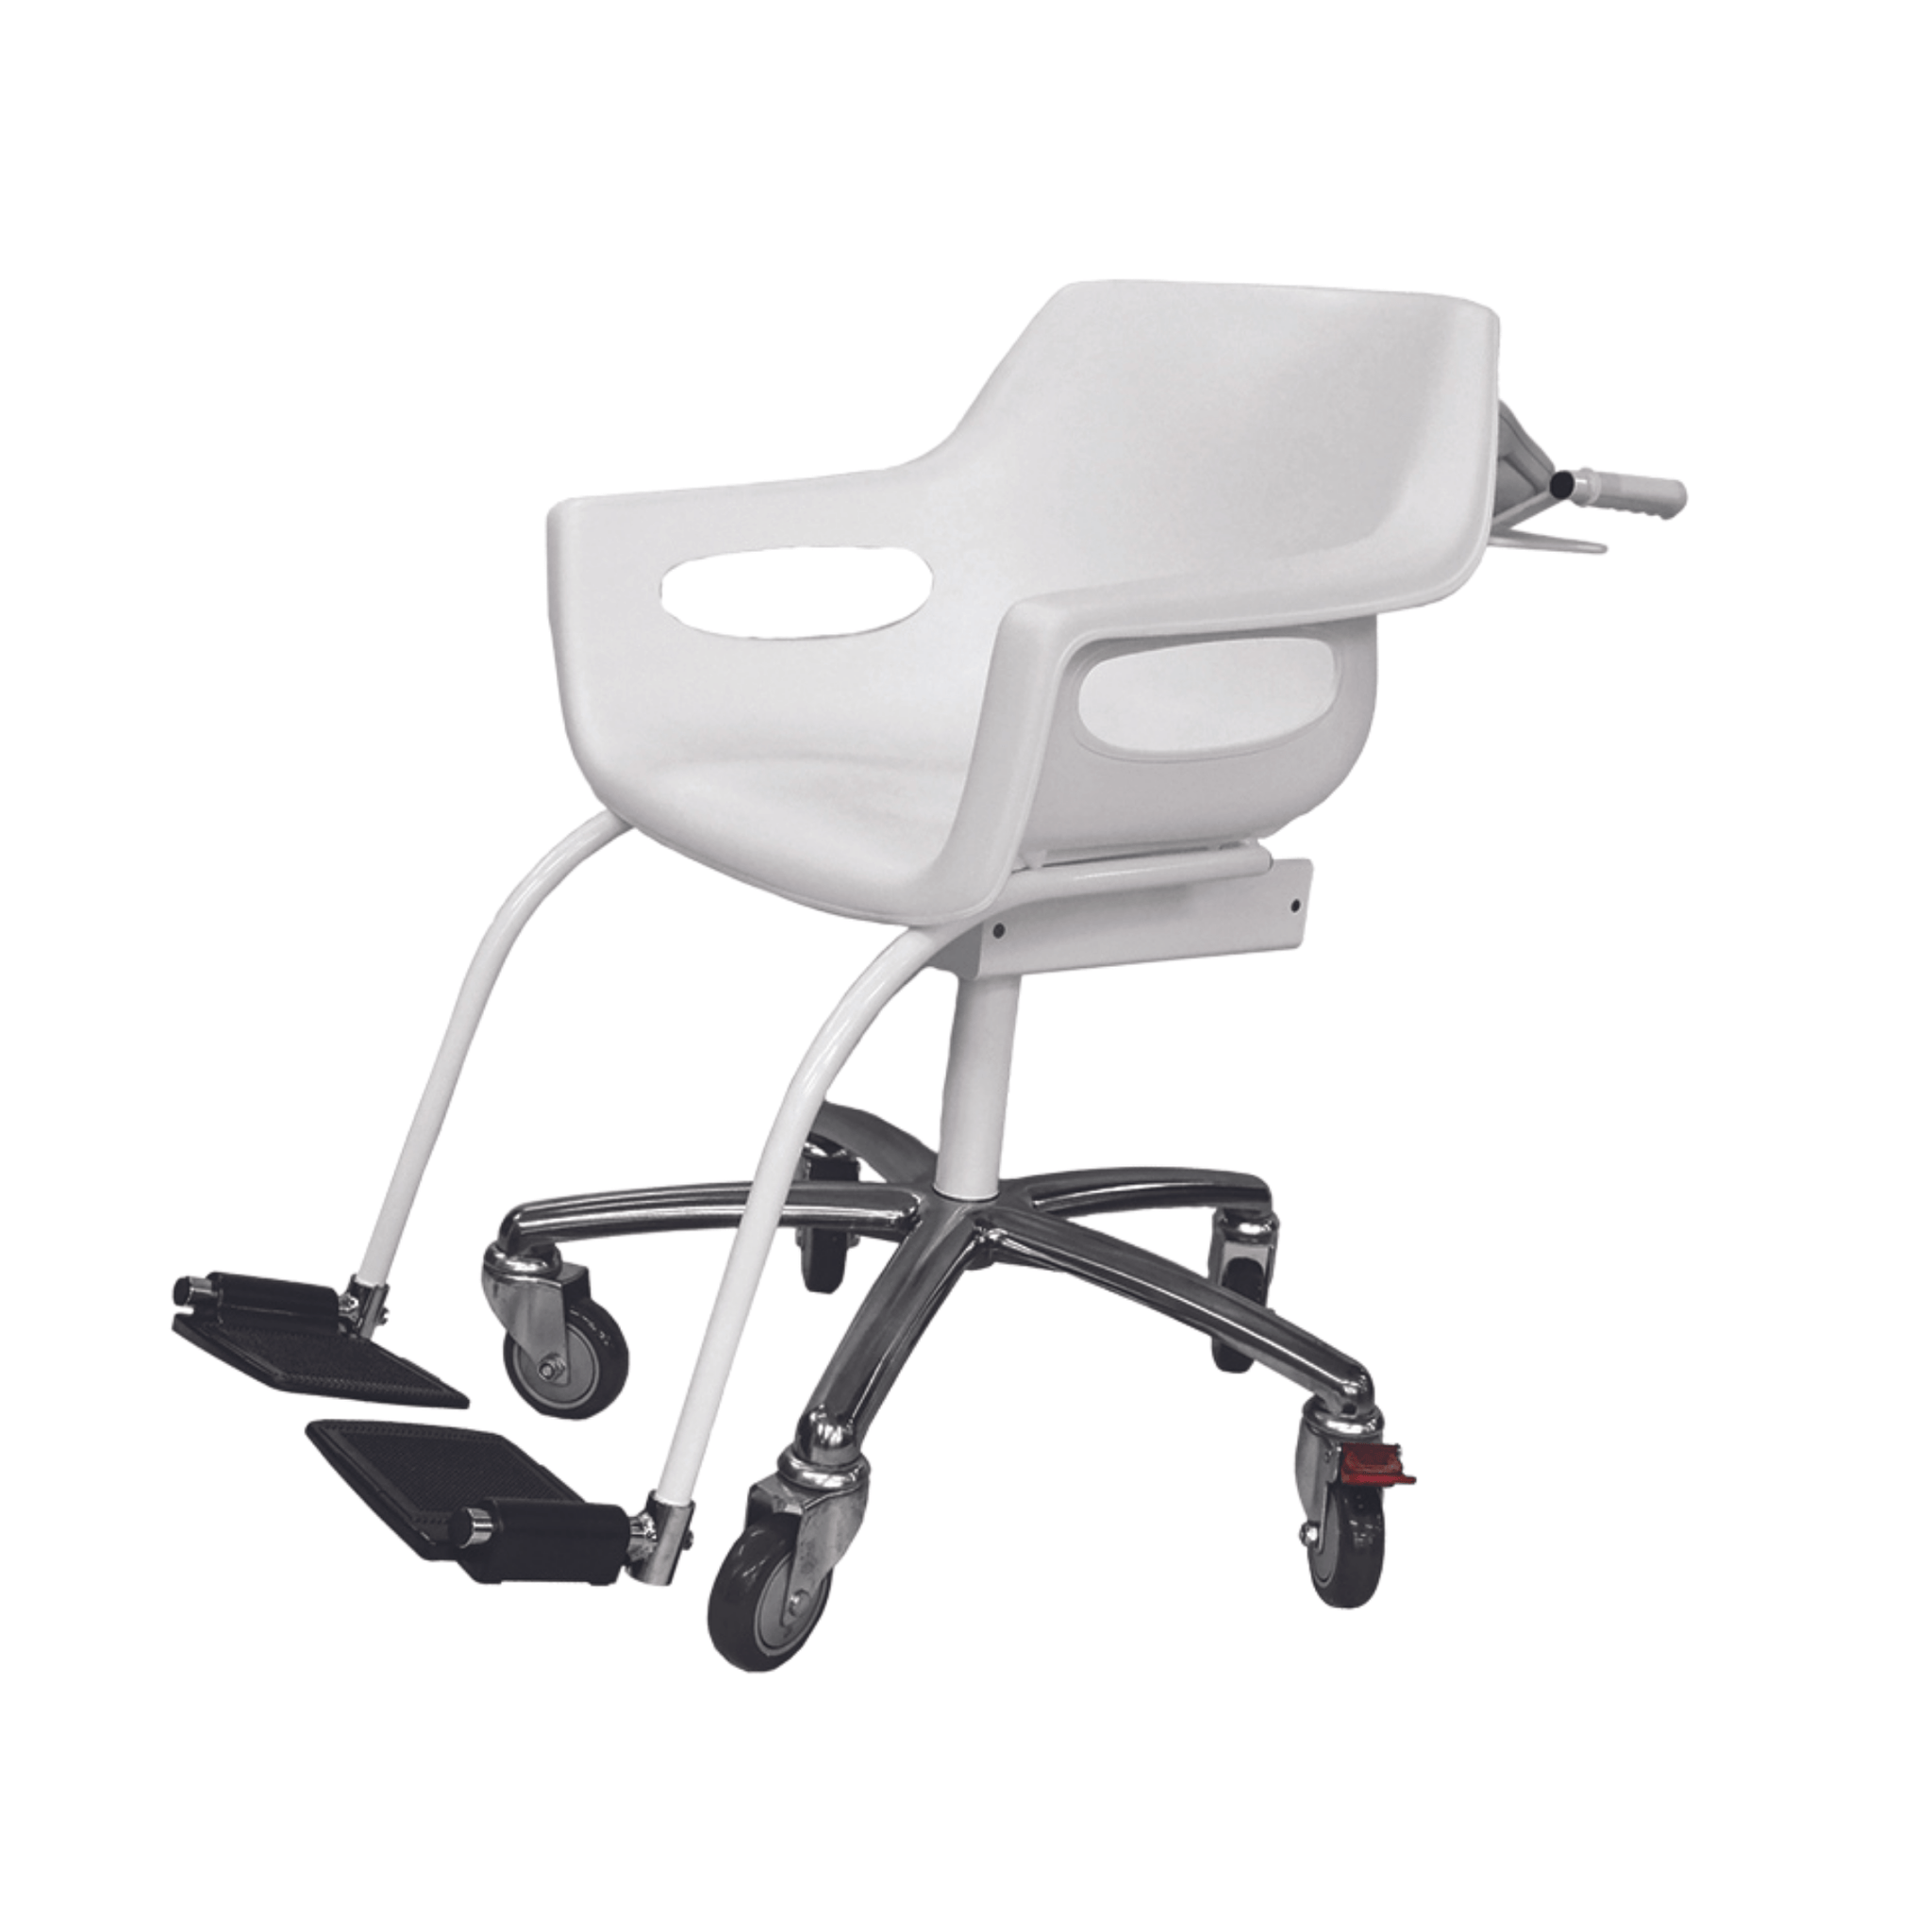 Mobile Digital Chair Scale